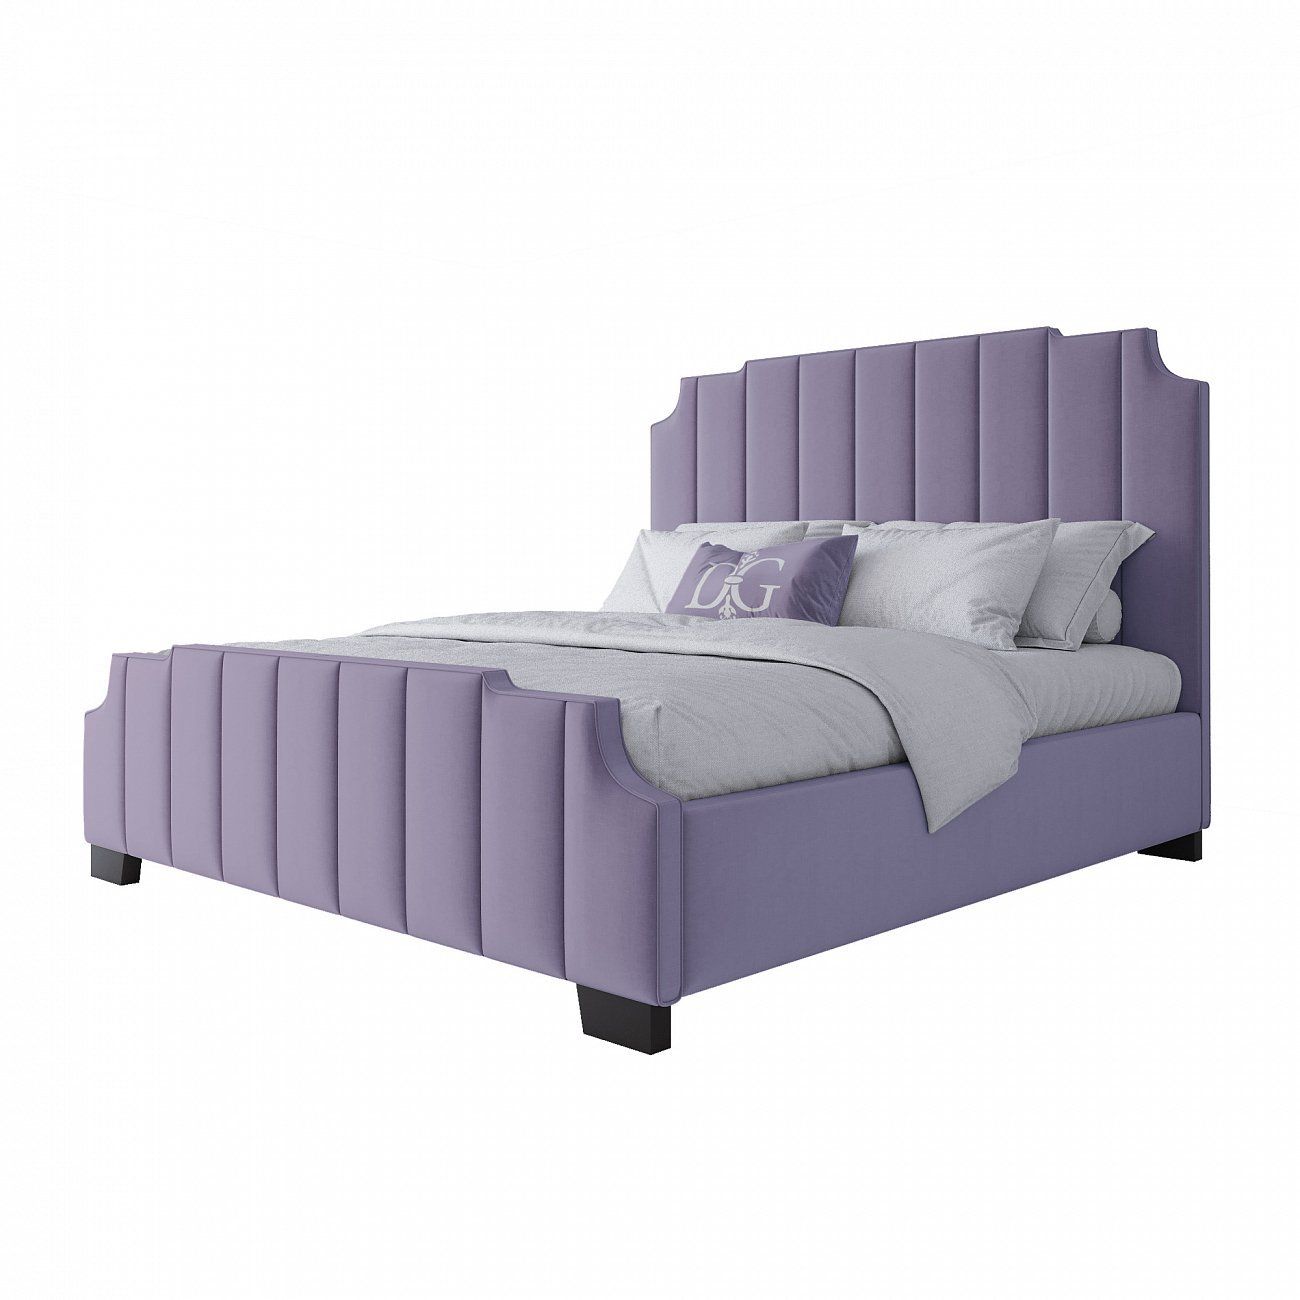 Double bed with upholstered headboard 180x200 cm purple Bony